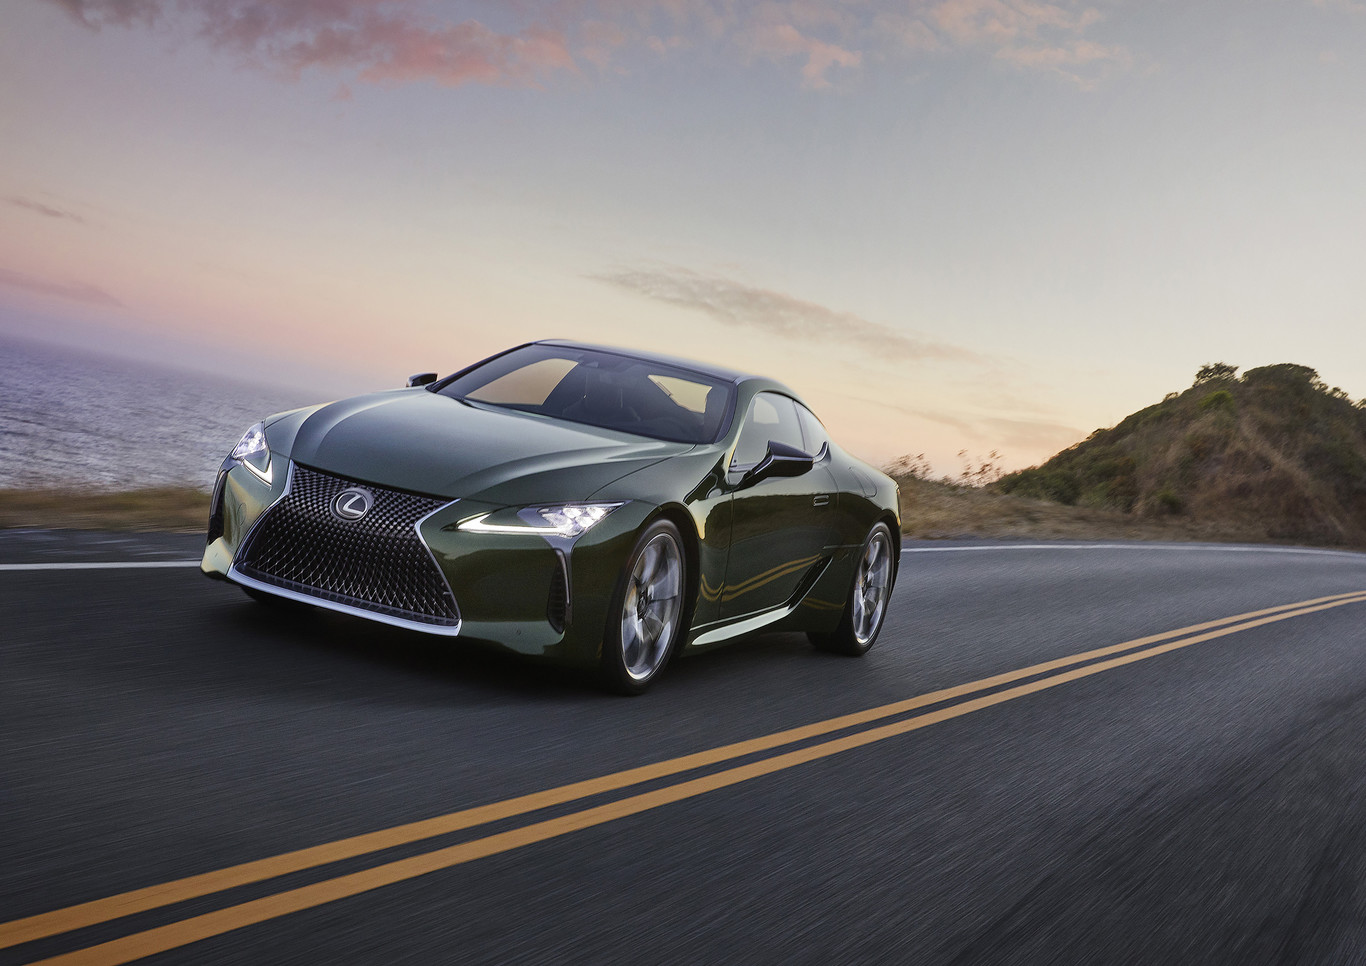 Lexus celebrates the launch of the new LC 500 in Mexico